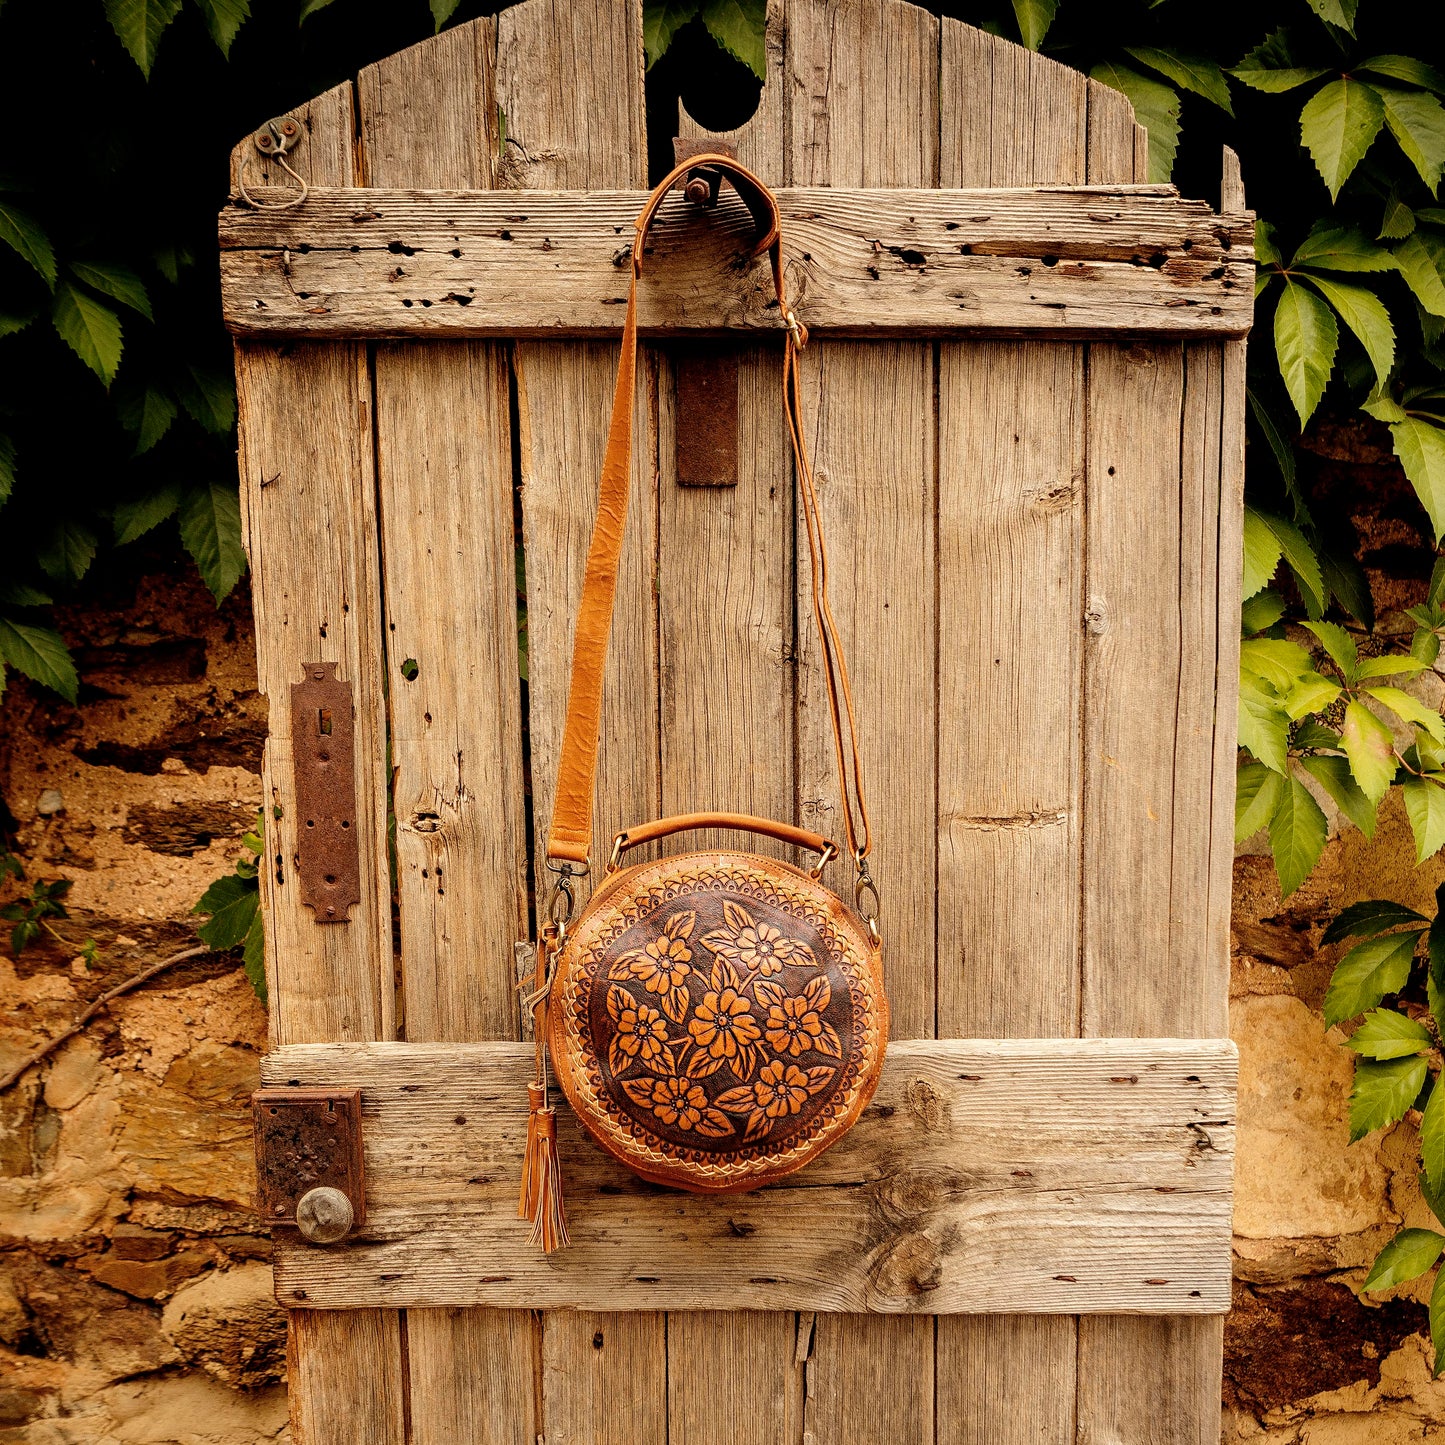 Carved Leather Round Bag